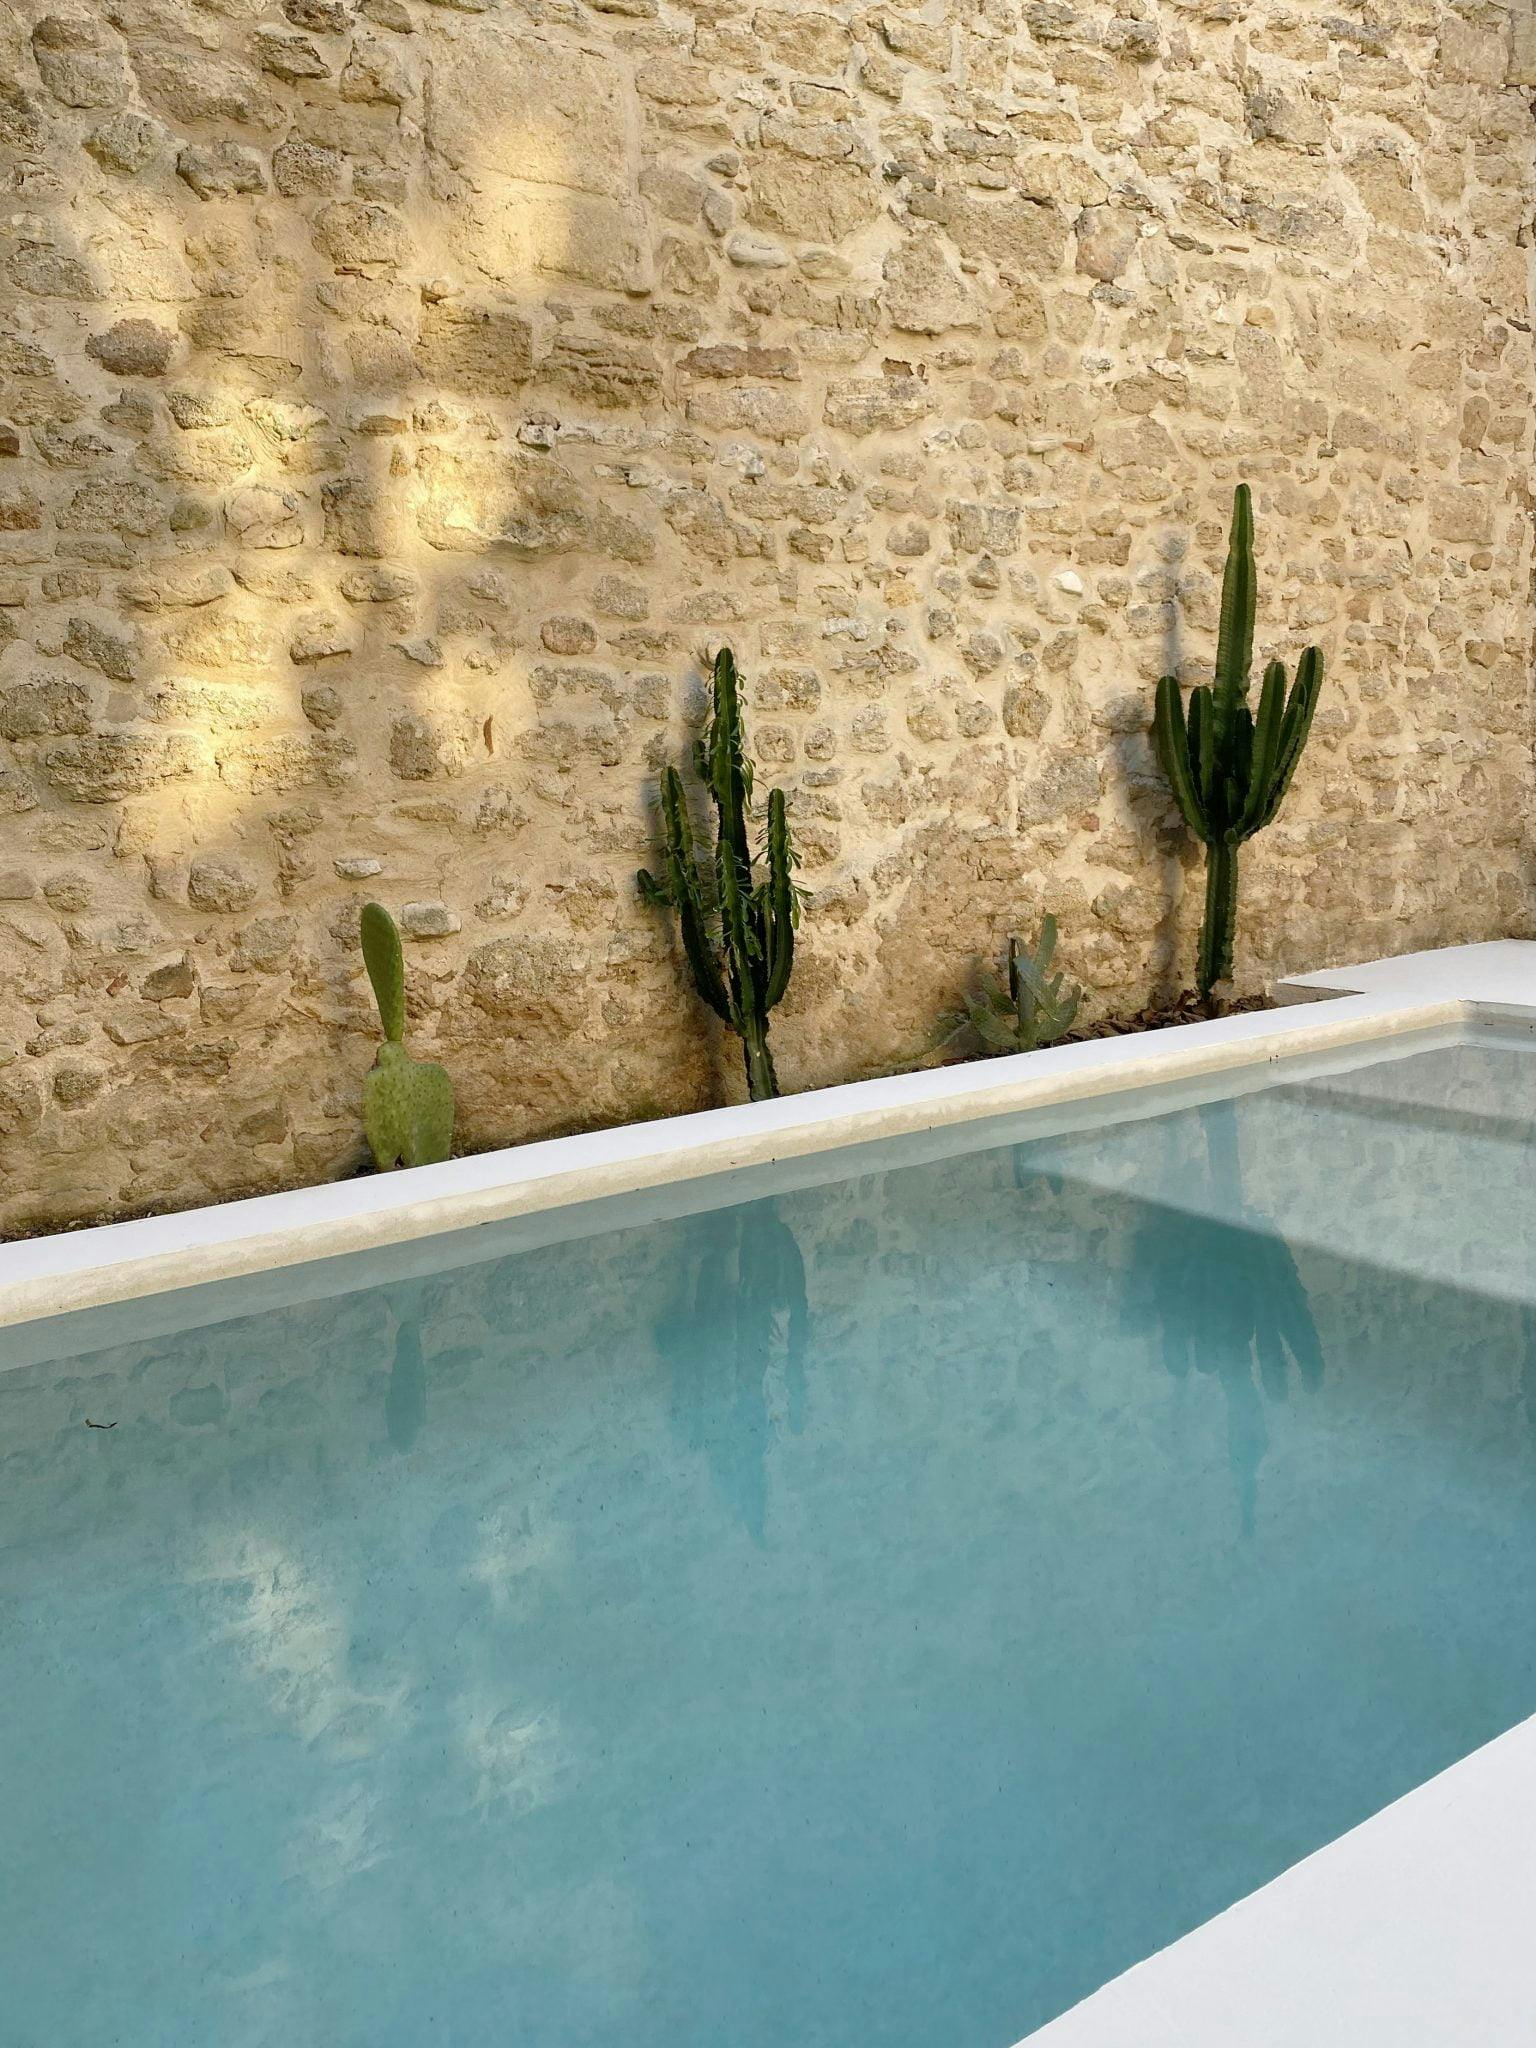 Dream pool lined with cactus and high stone walls